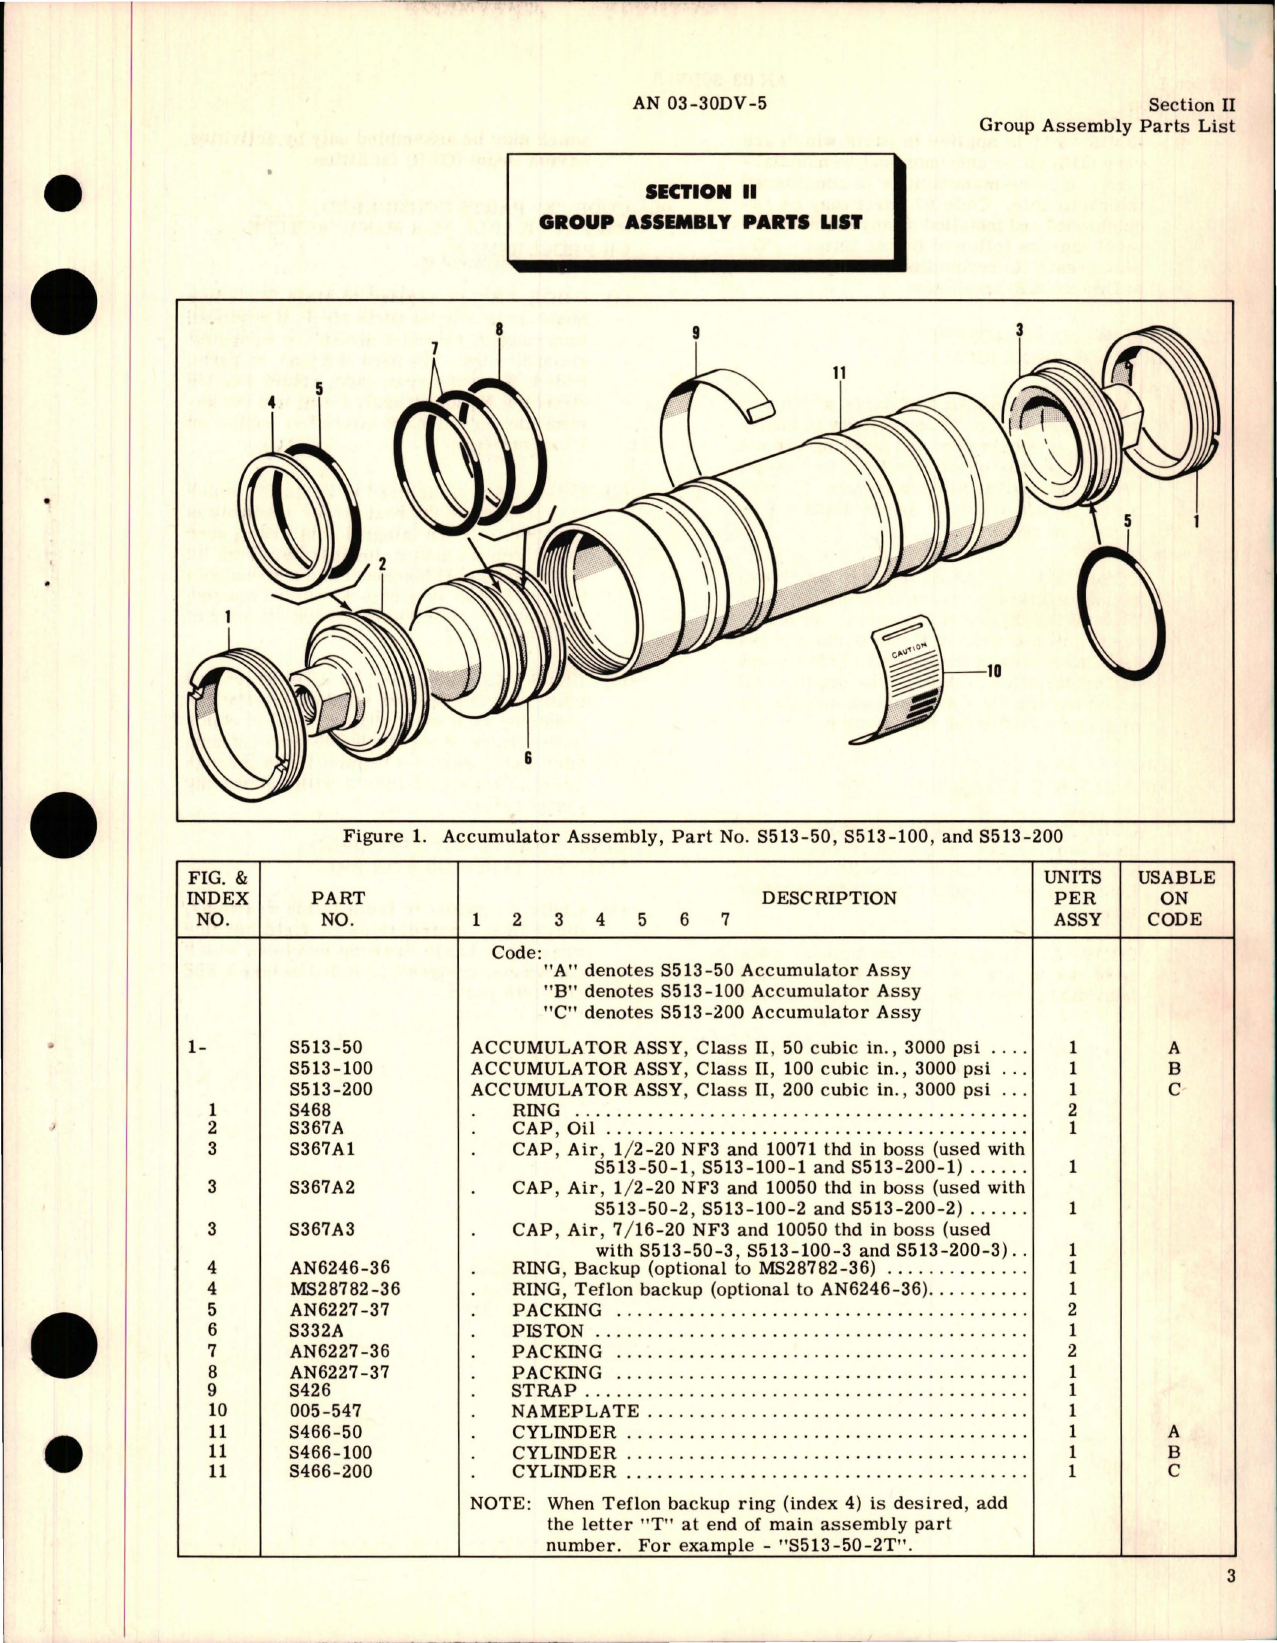 Sample page 5 from AirCorps Library document: Illustrated Parts Breakdown for Accumulators